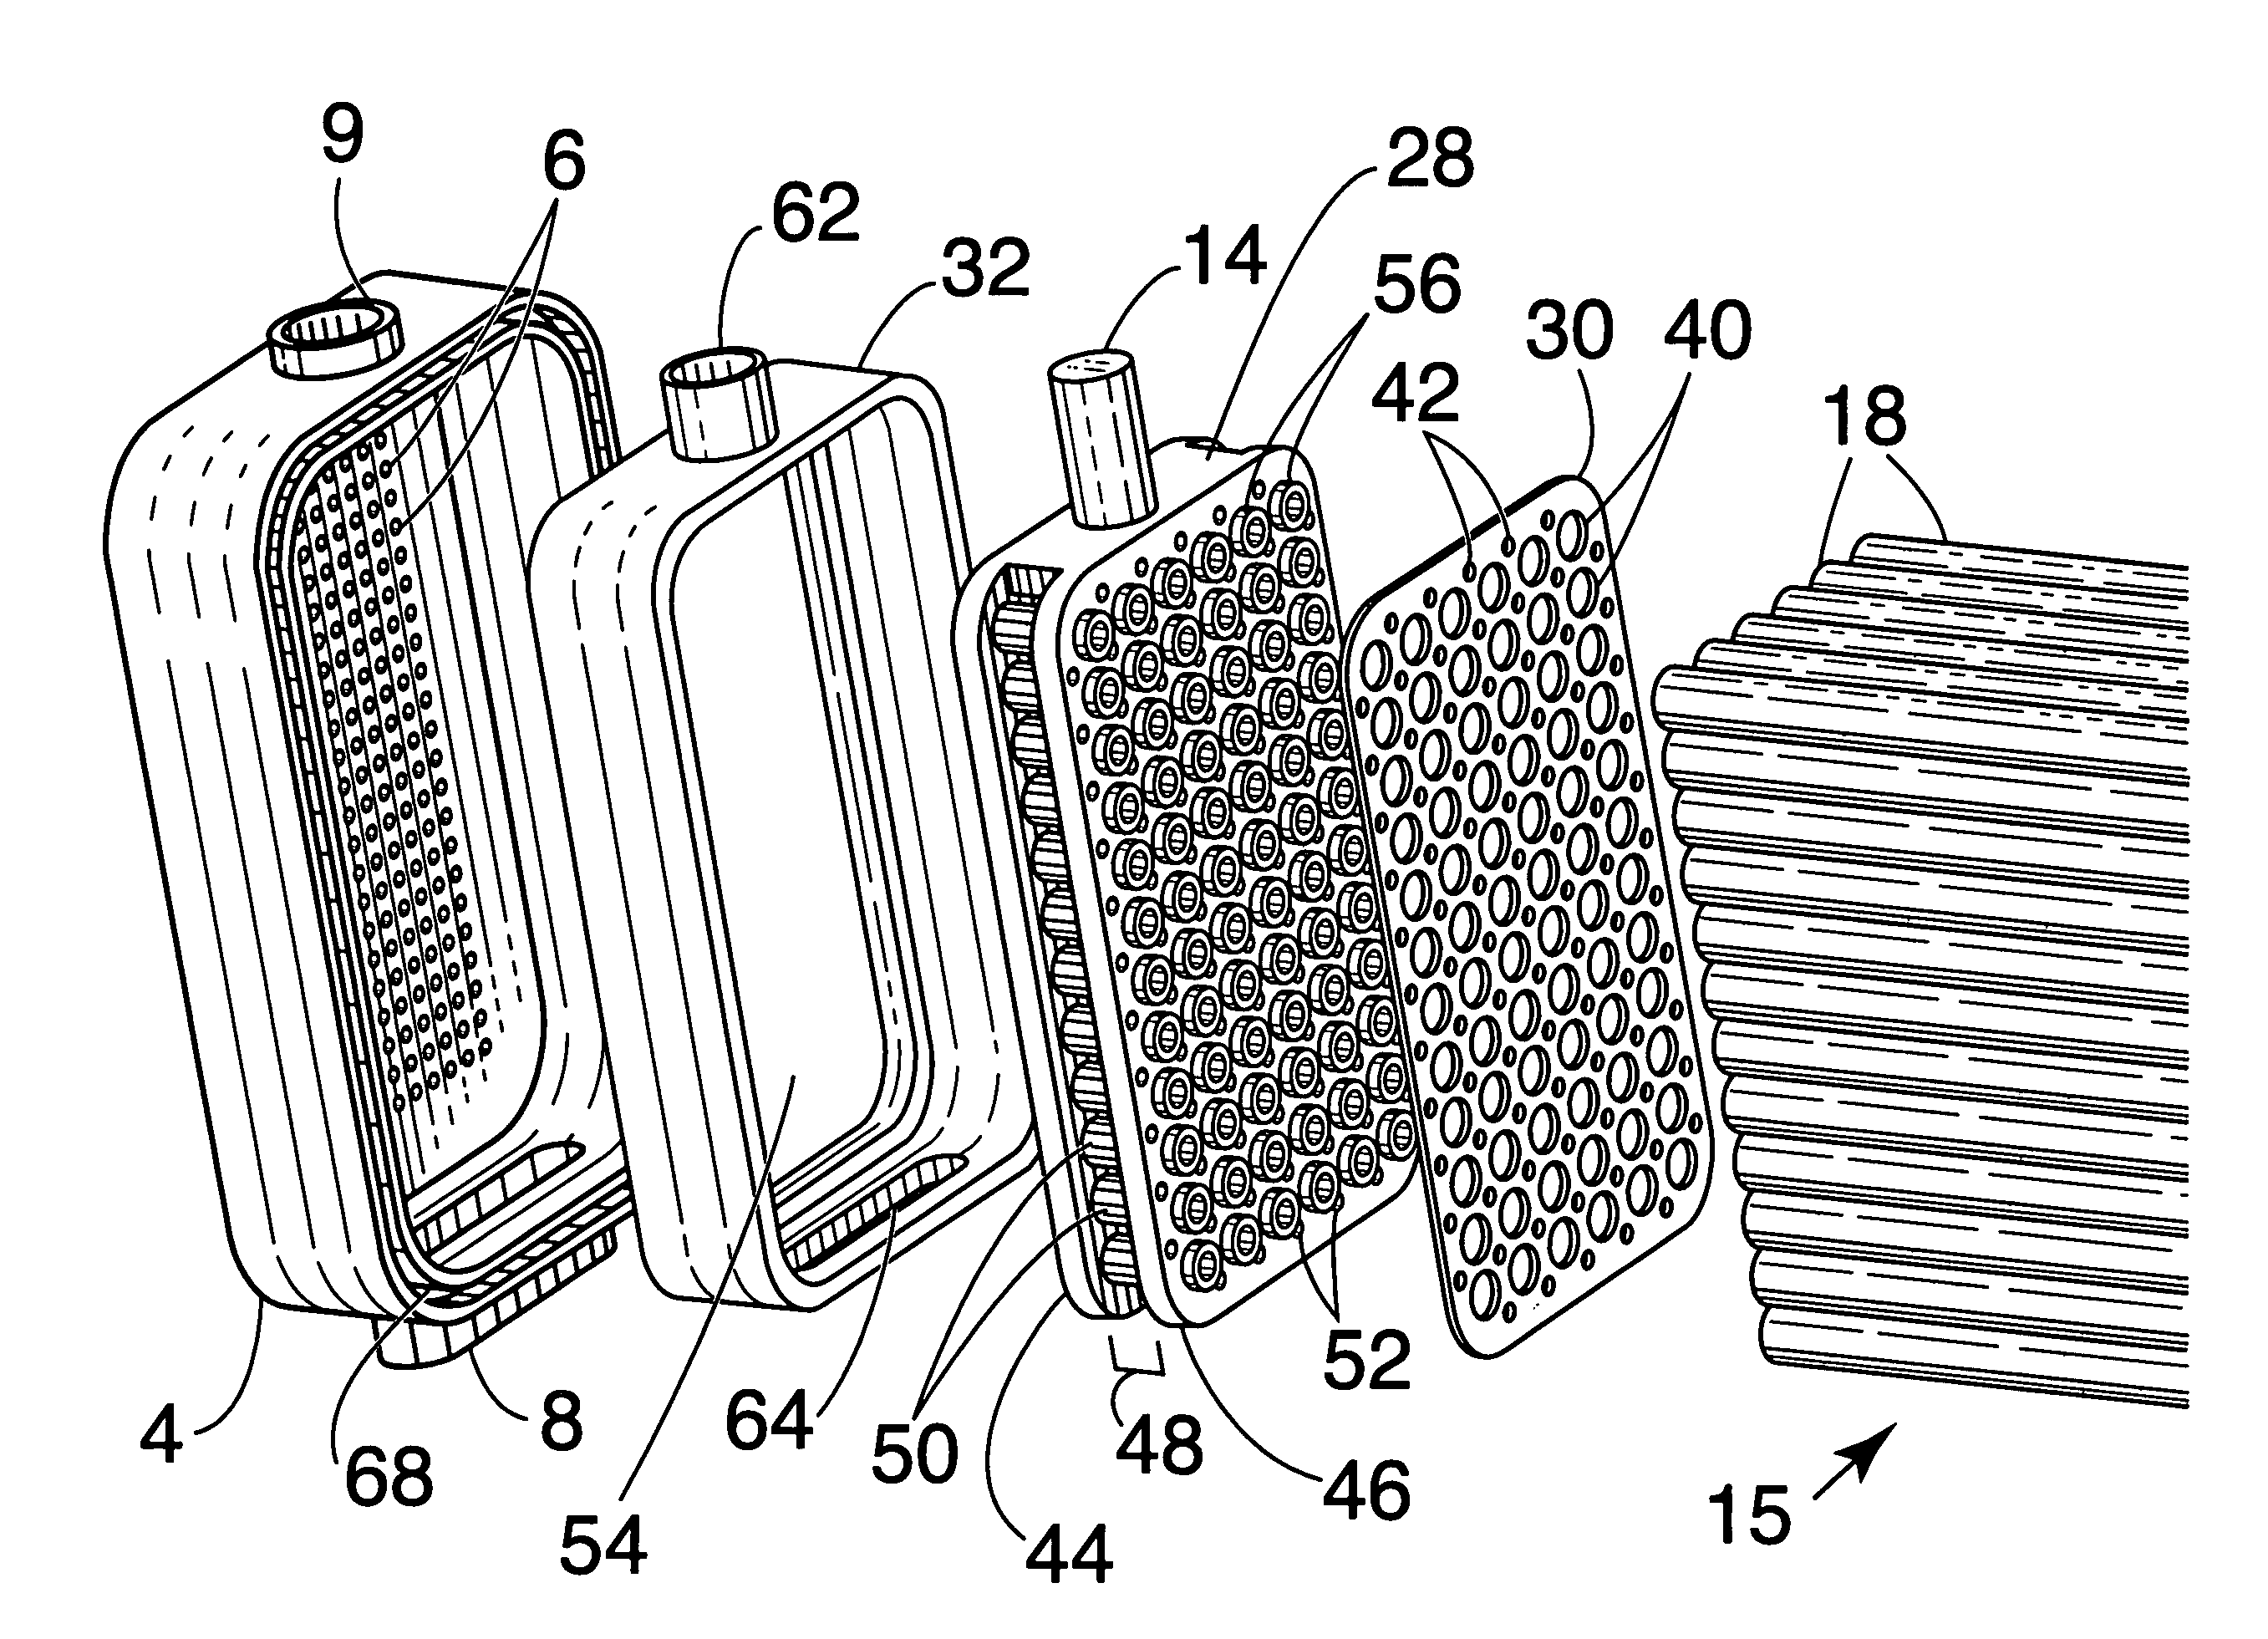 Stack configurations for tubular solid oxide fuel cells